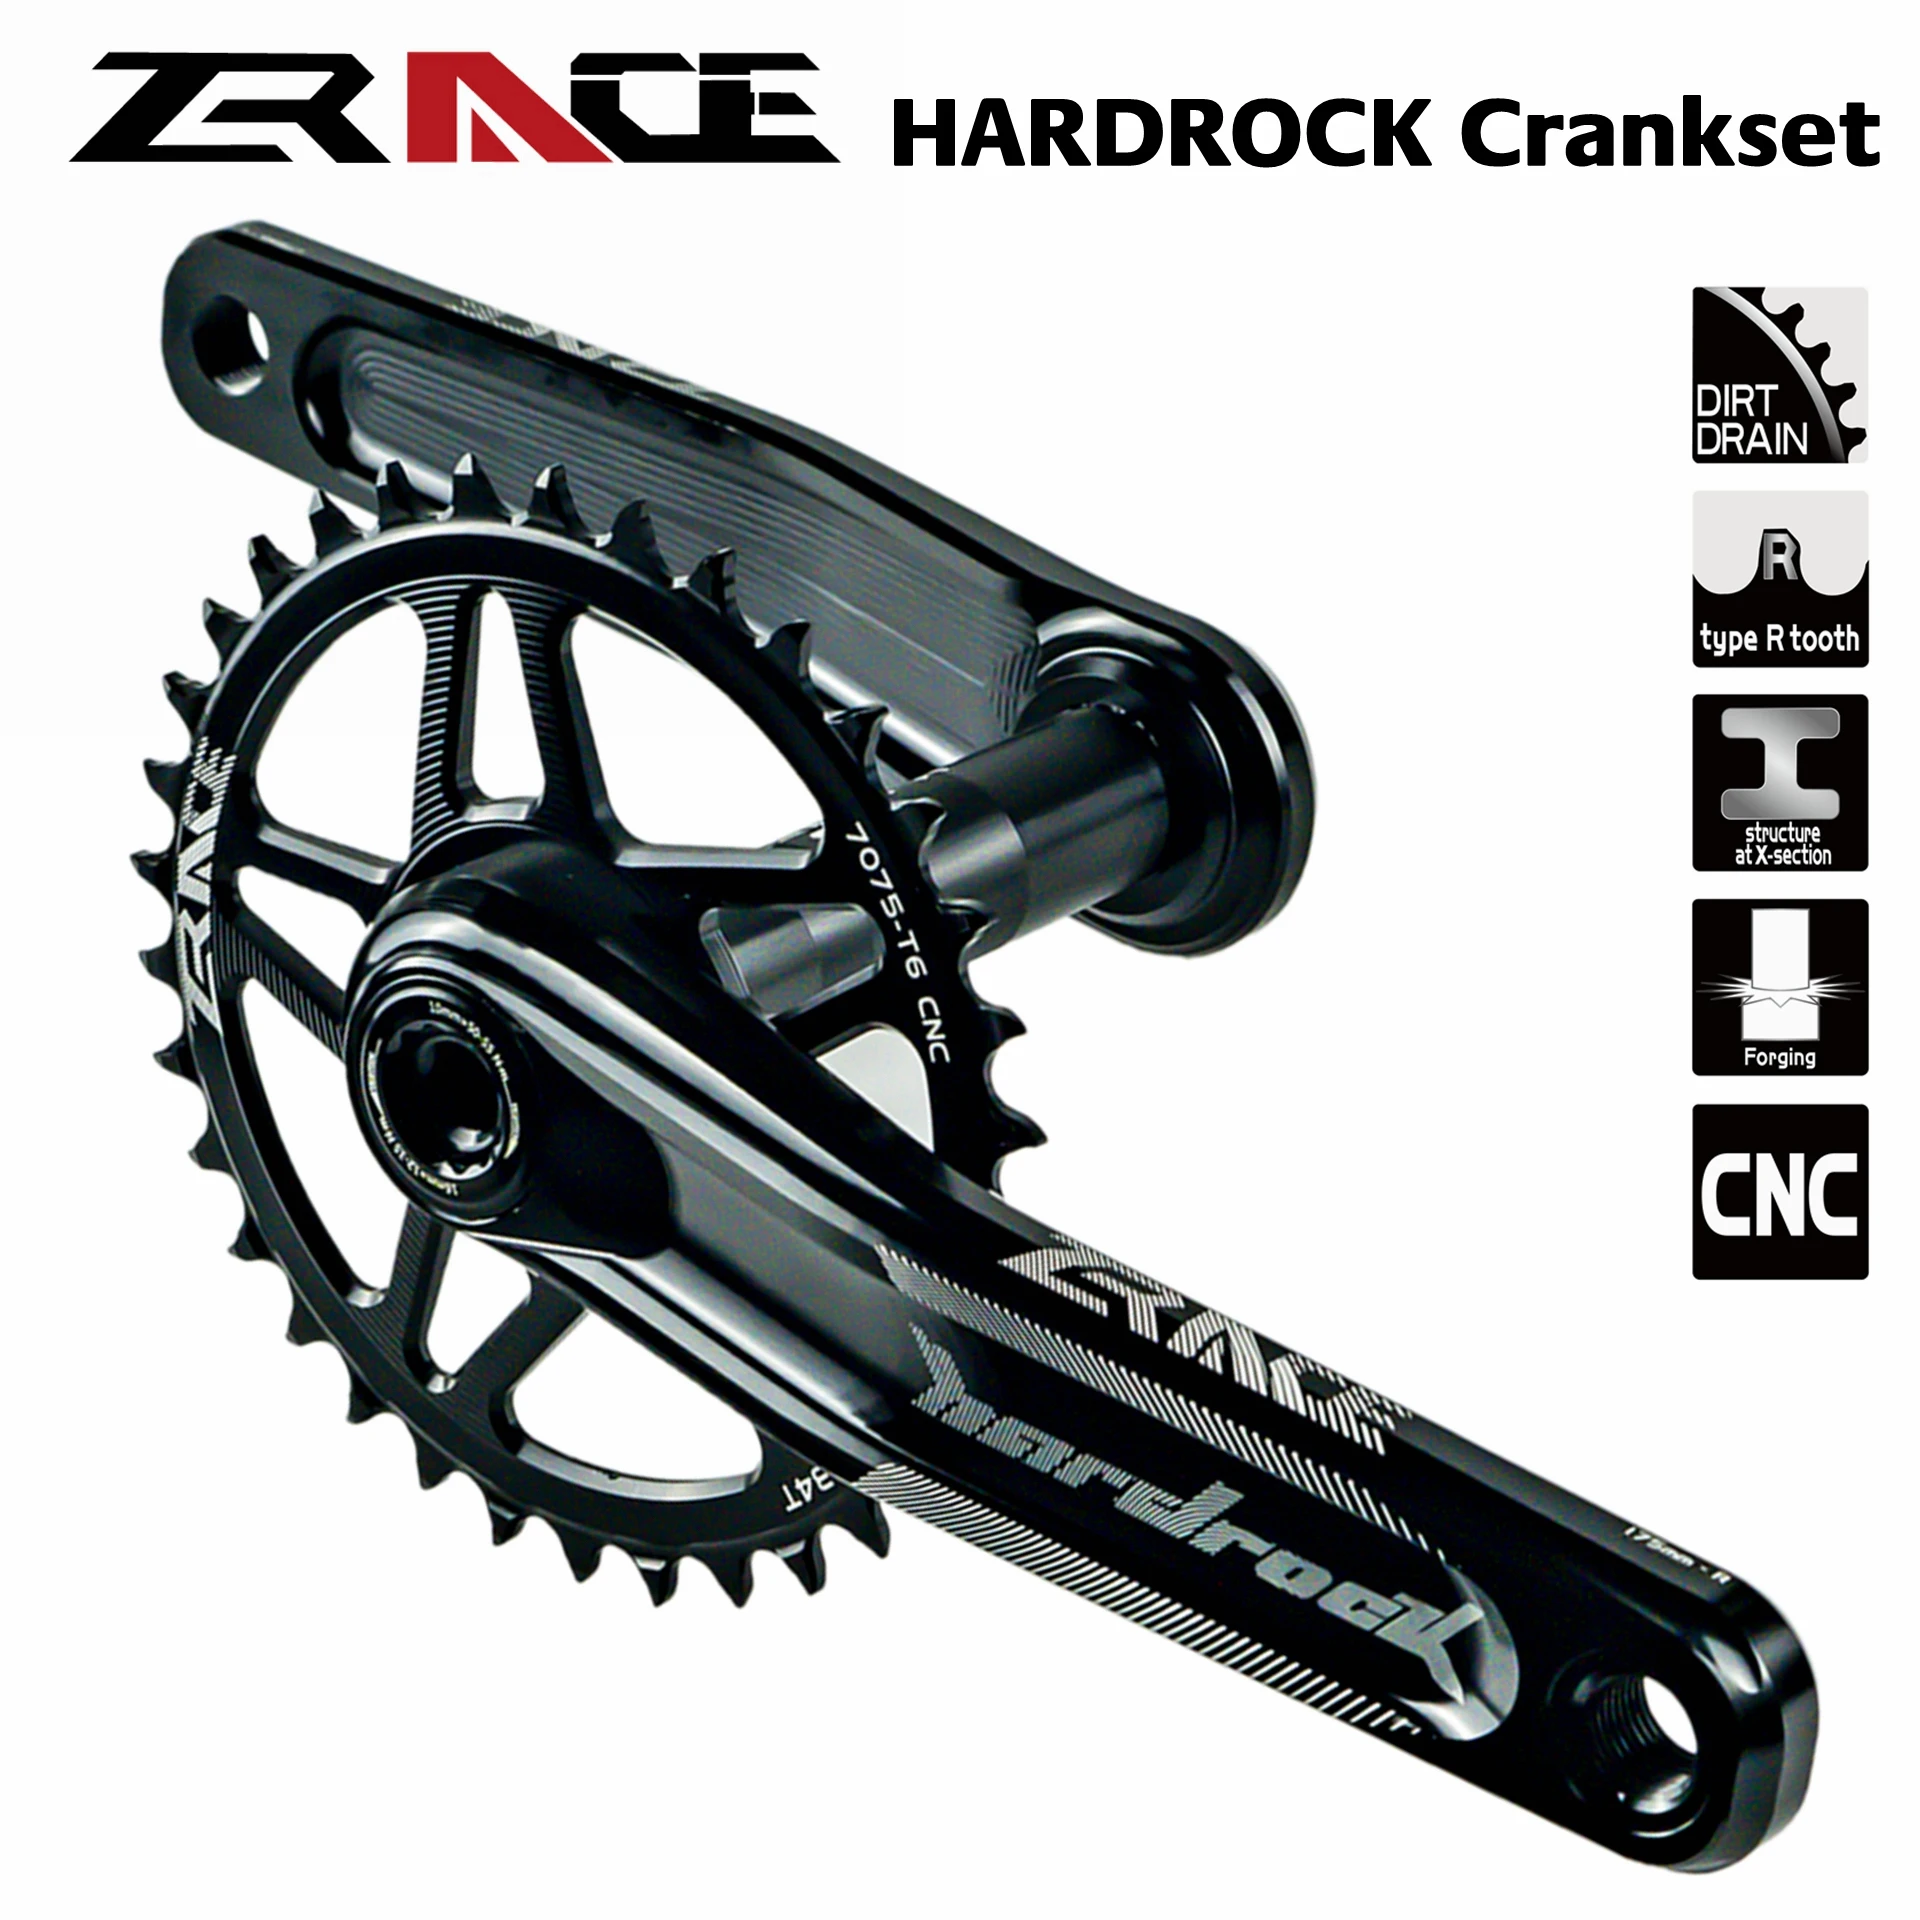 ZRACE HARDROCK 1 x 10 11 12 Speed Boost Crankset Eagle Tooth for MTB XC/TR/DH/FR 170 / 175mm,32T/34T/36T,BB83,BB68/73 Chainset